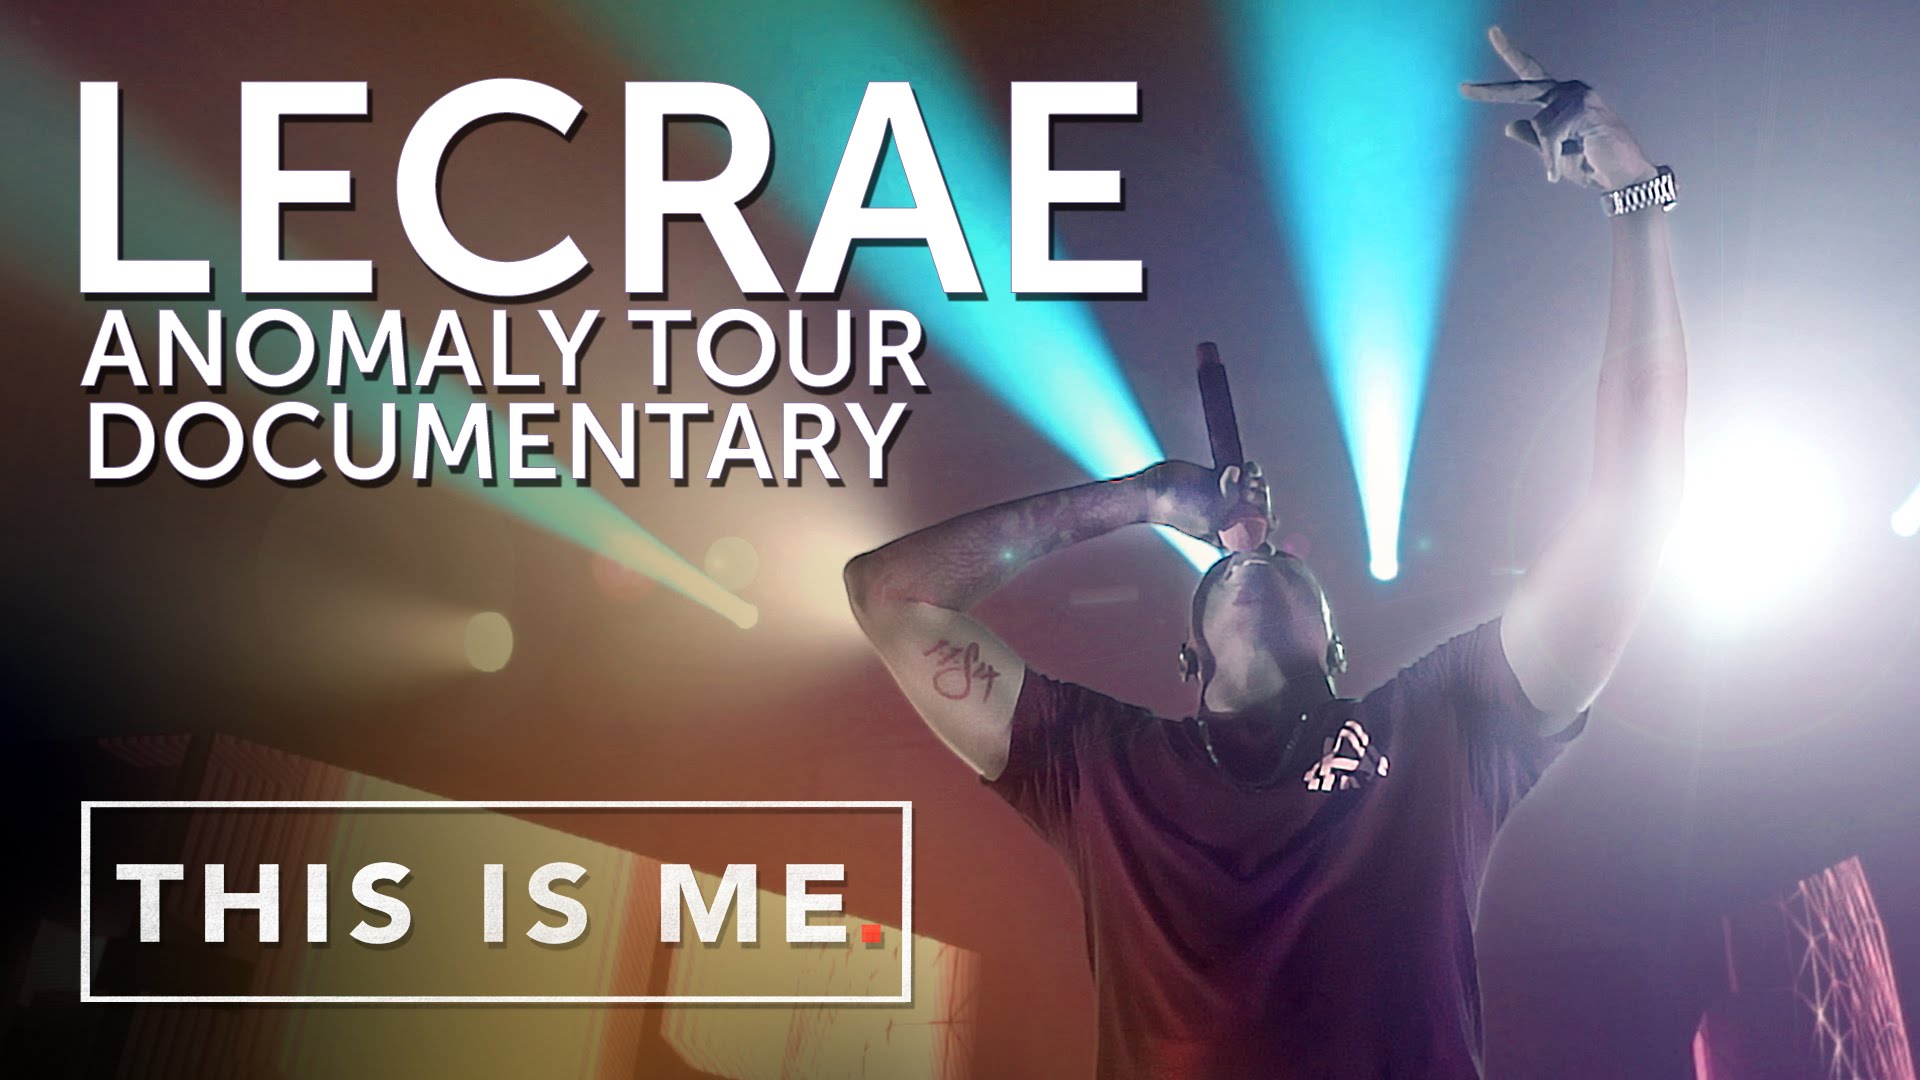 LECRAE – Anomaly Tour Documentary – This Is Me TV